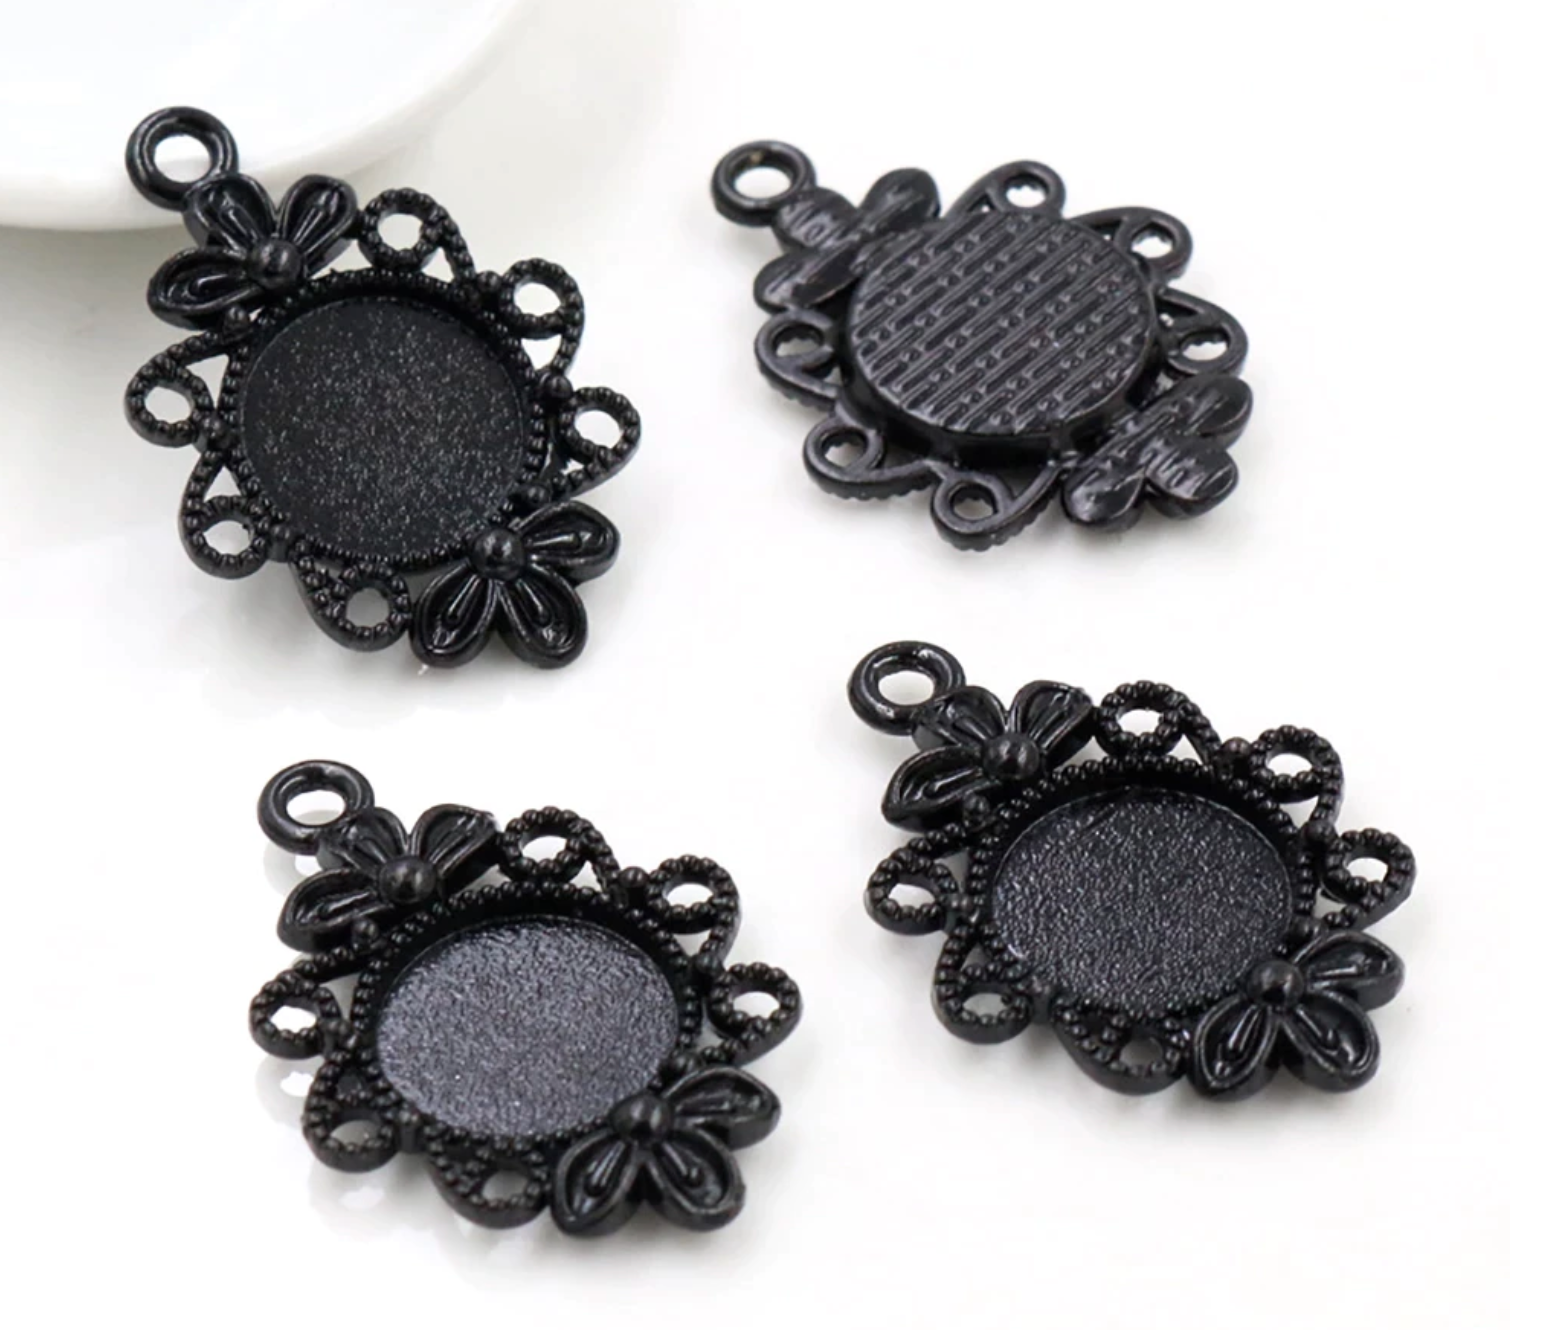 4pcs, 12mm Inner Size Flower Style Cabochon Base Cameo Setting Charms Pendant in Black